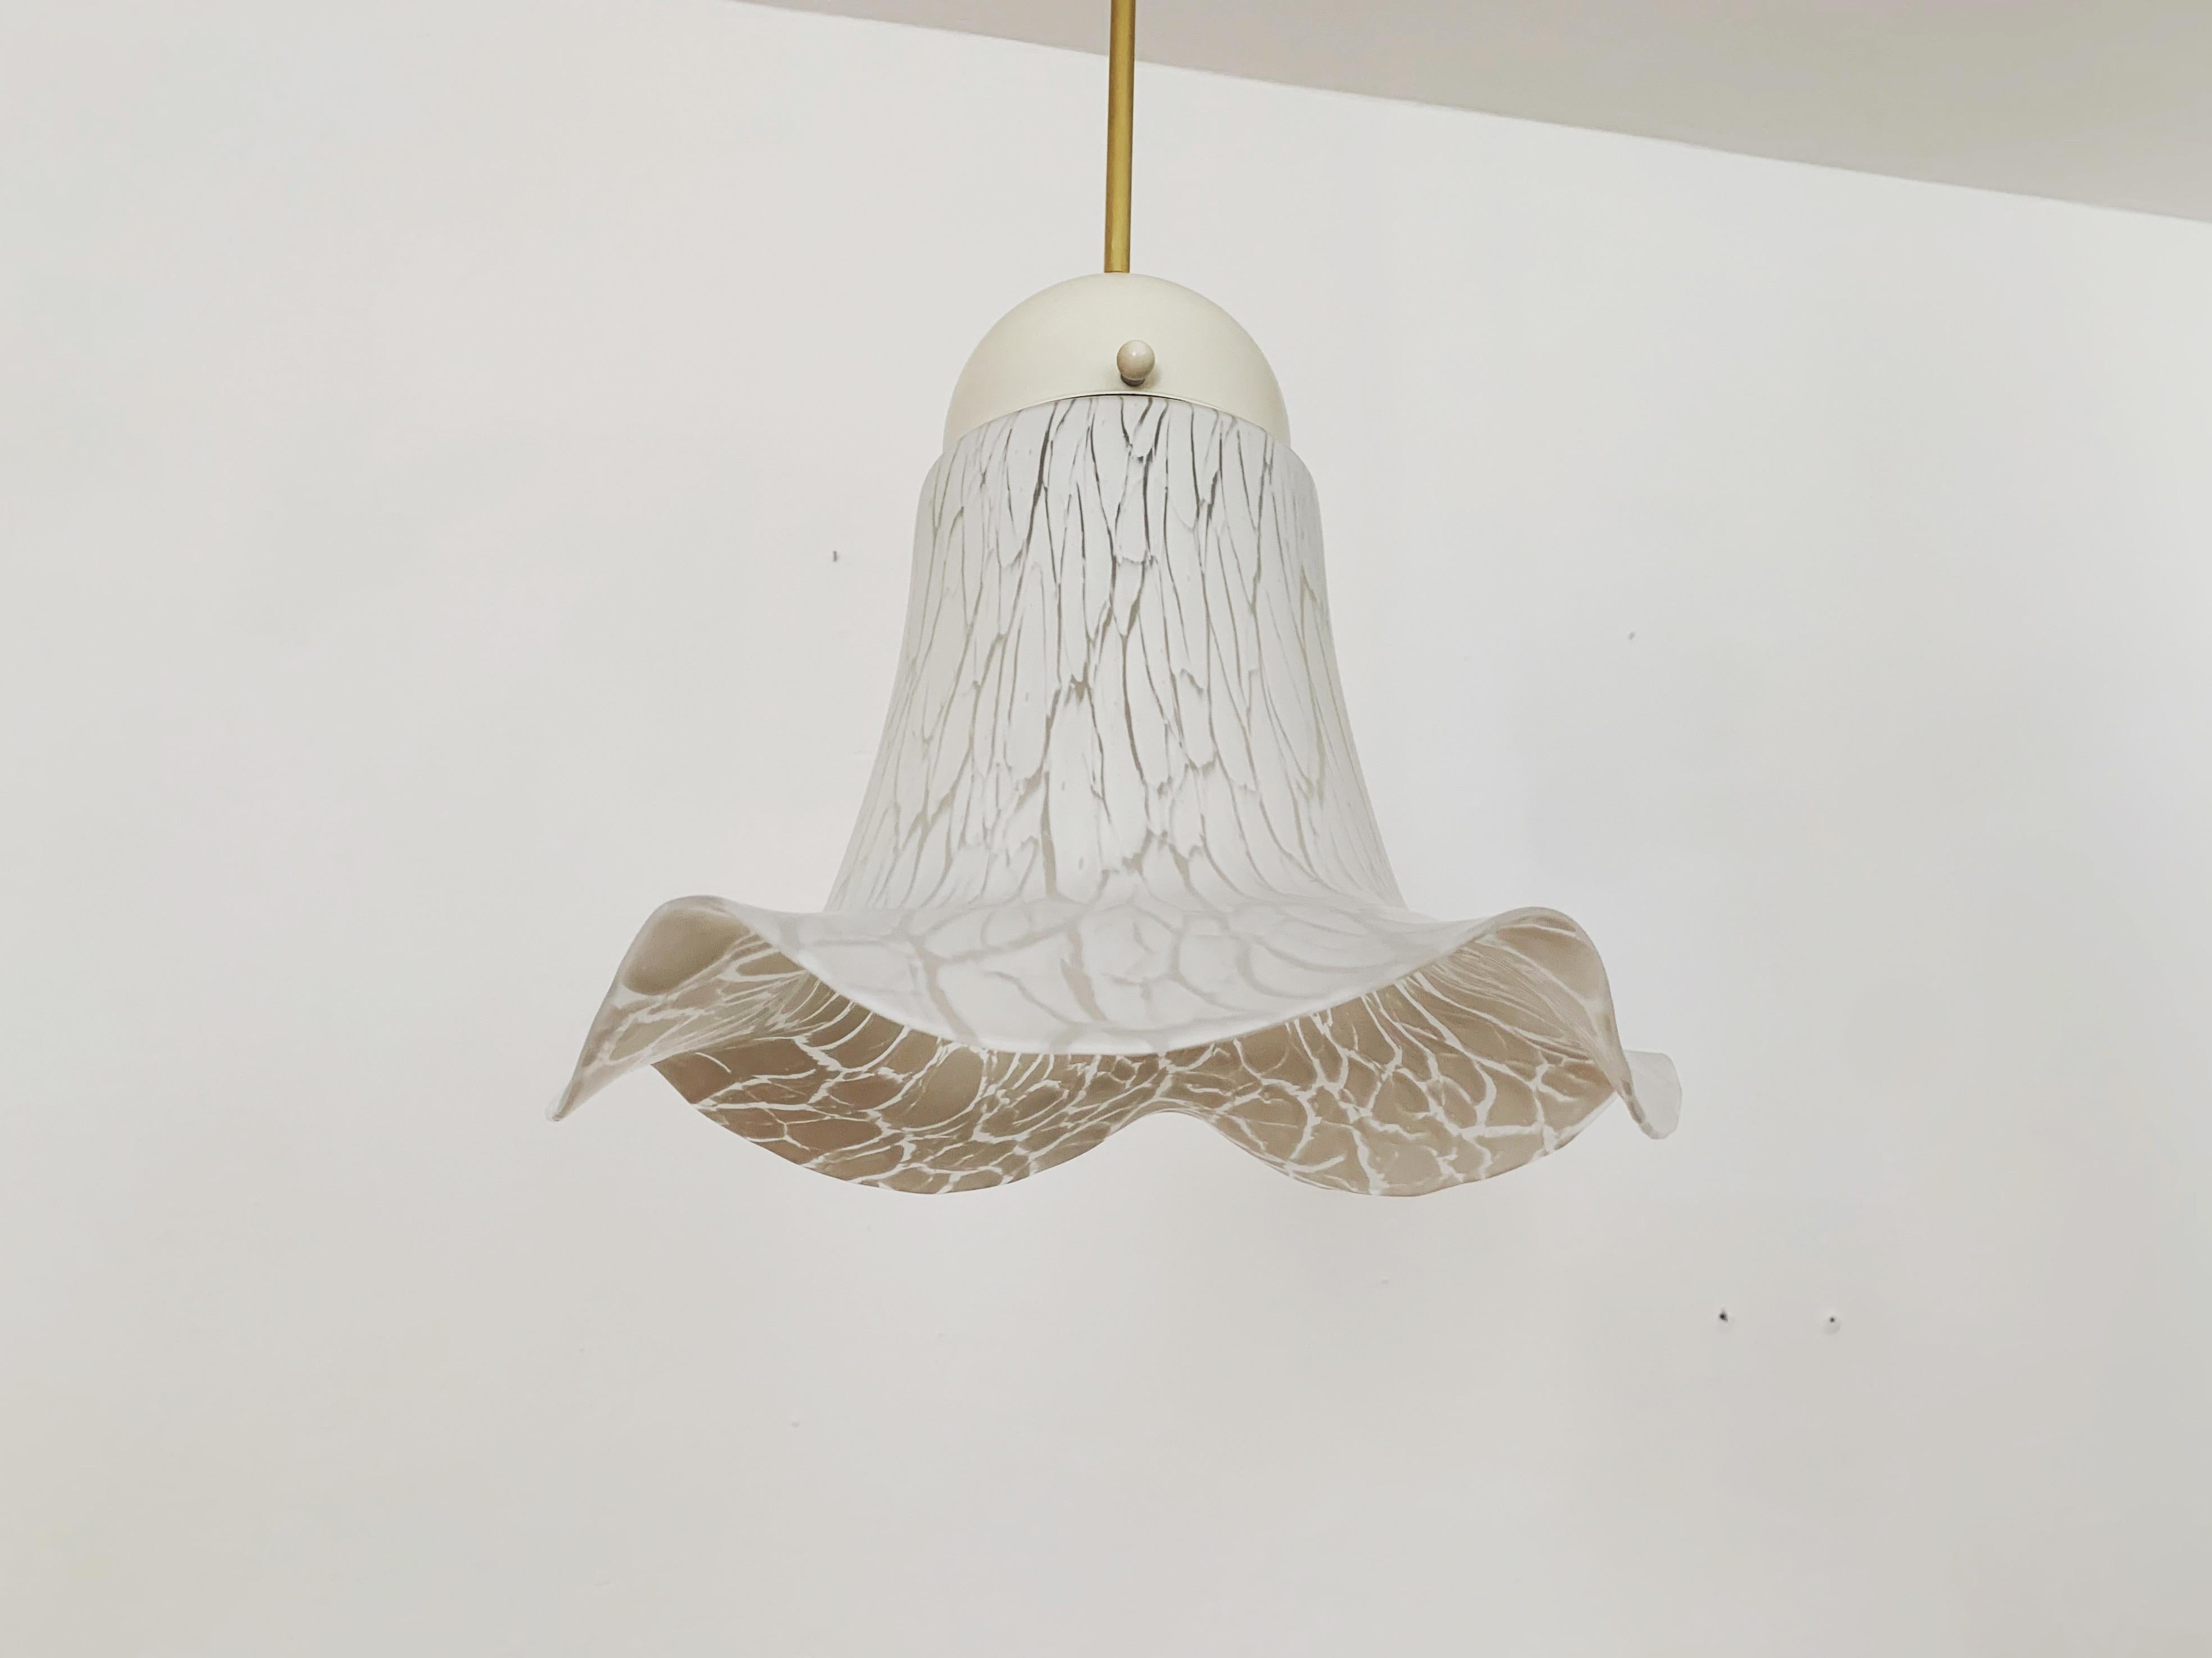 Exceptionally beautiful lamp from the 1960s.
The great pattern in connection with the beautifully shaped glass spread a very pleasant light and make the lamp very special.
Very fine and beautiful design.

Manufacturer: Peill and